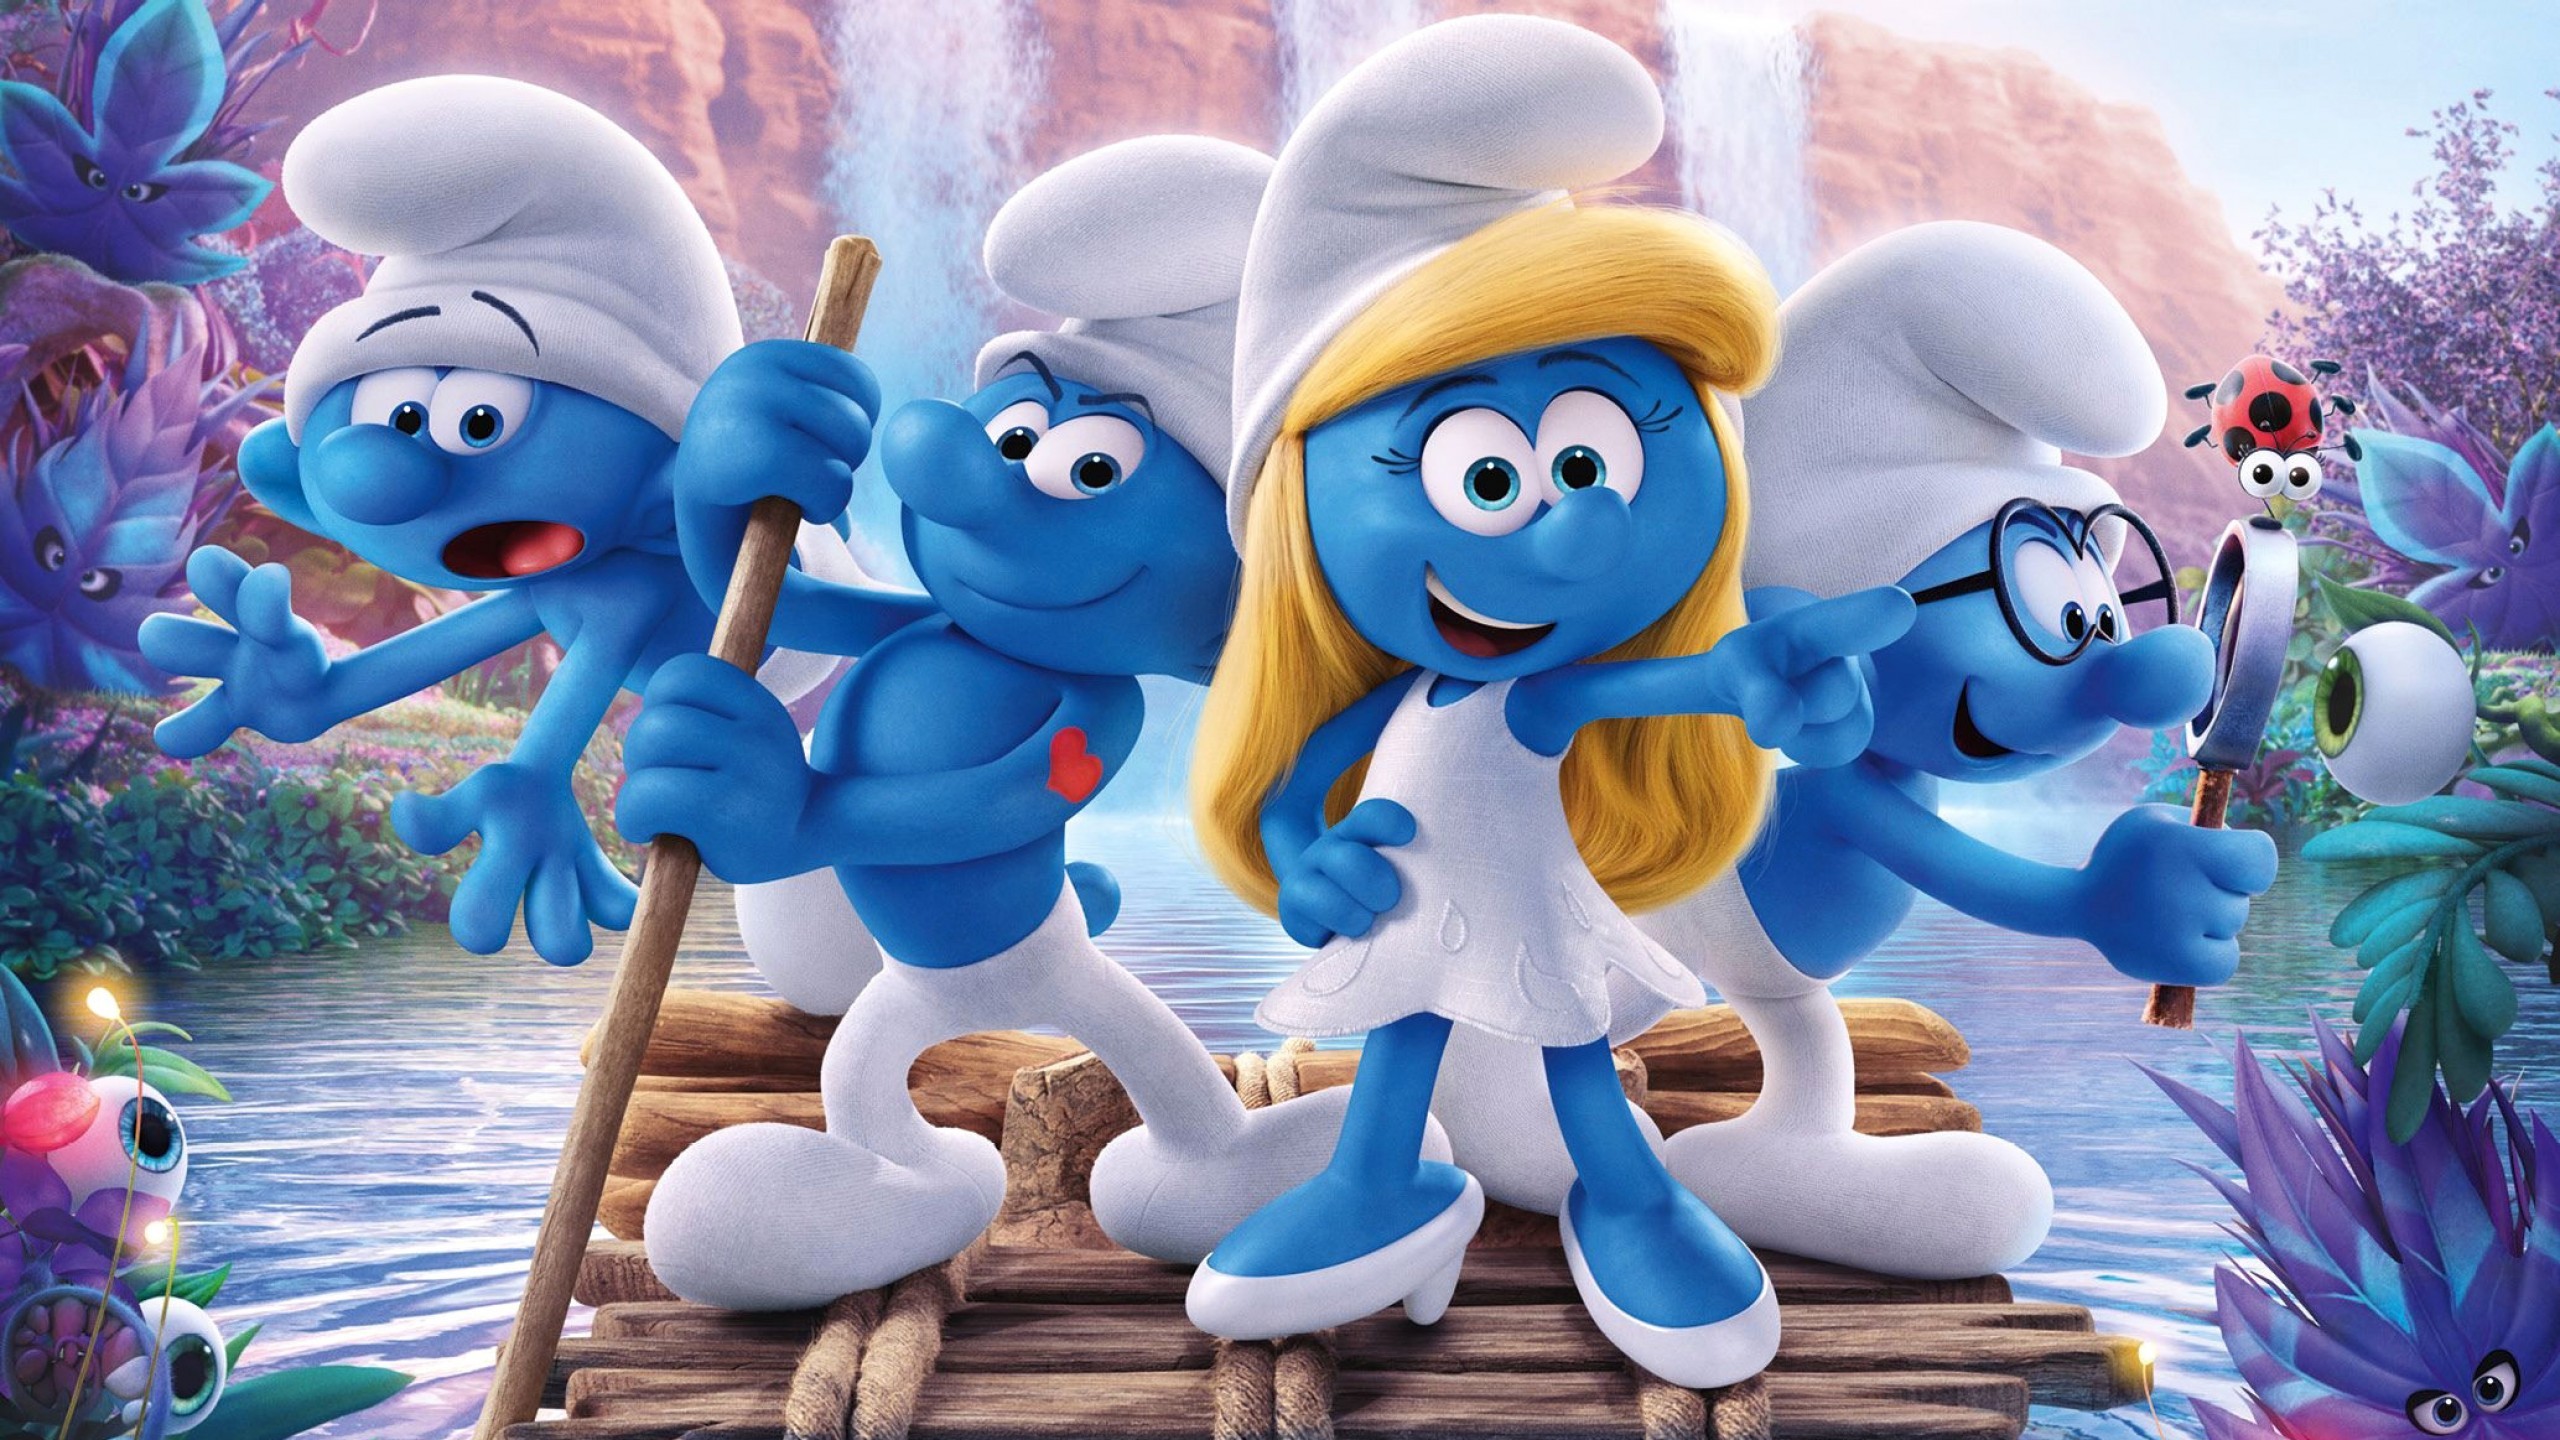 2560x1440 Clumsy smurf backgrounds .